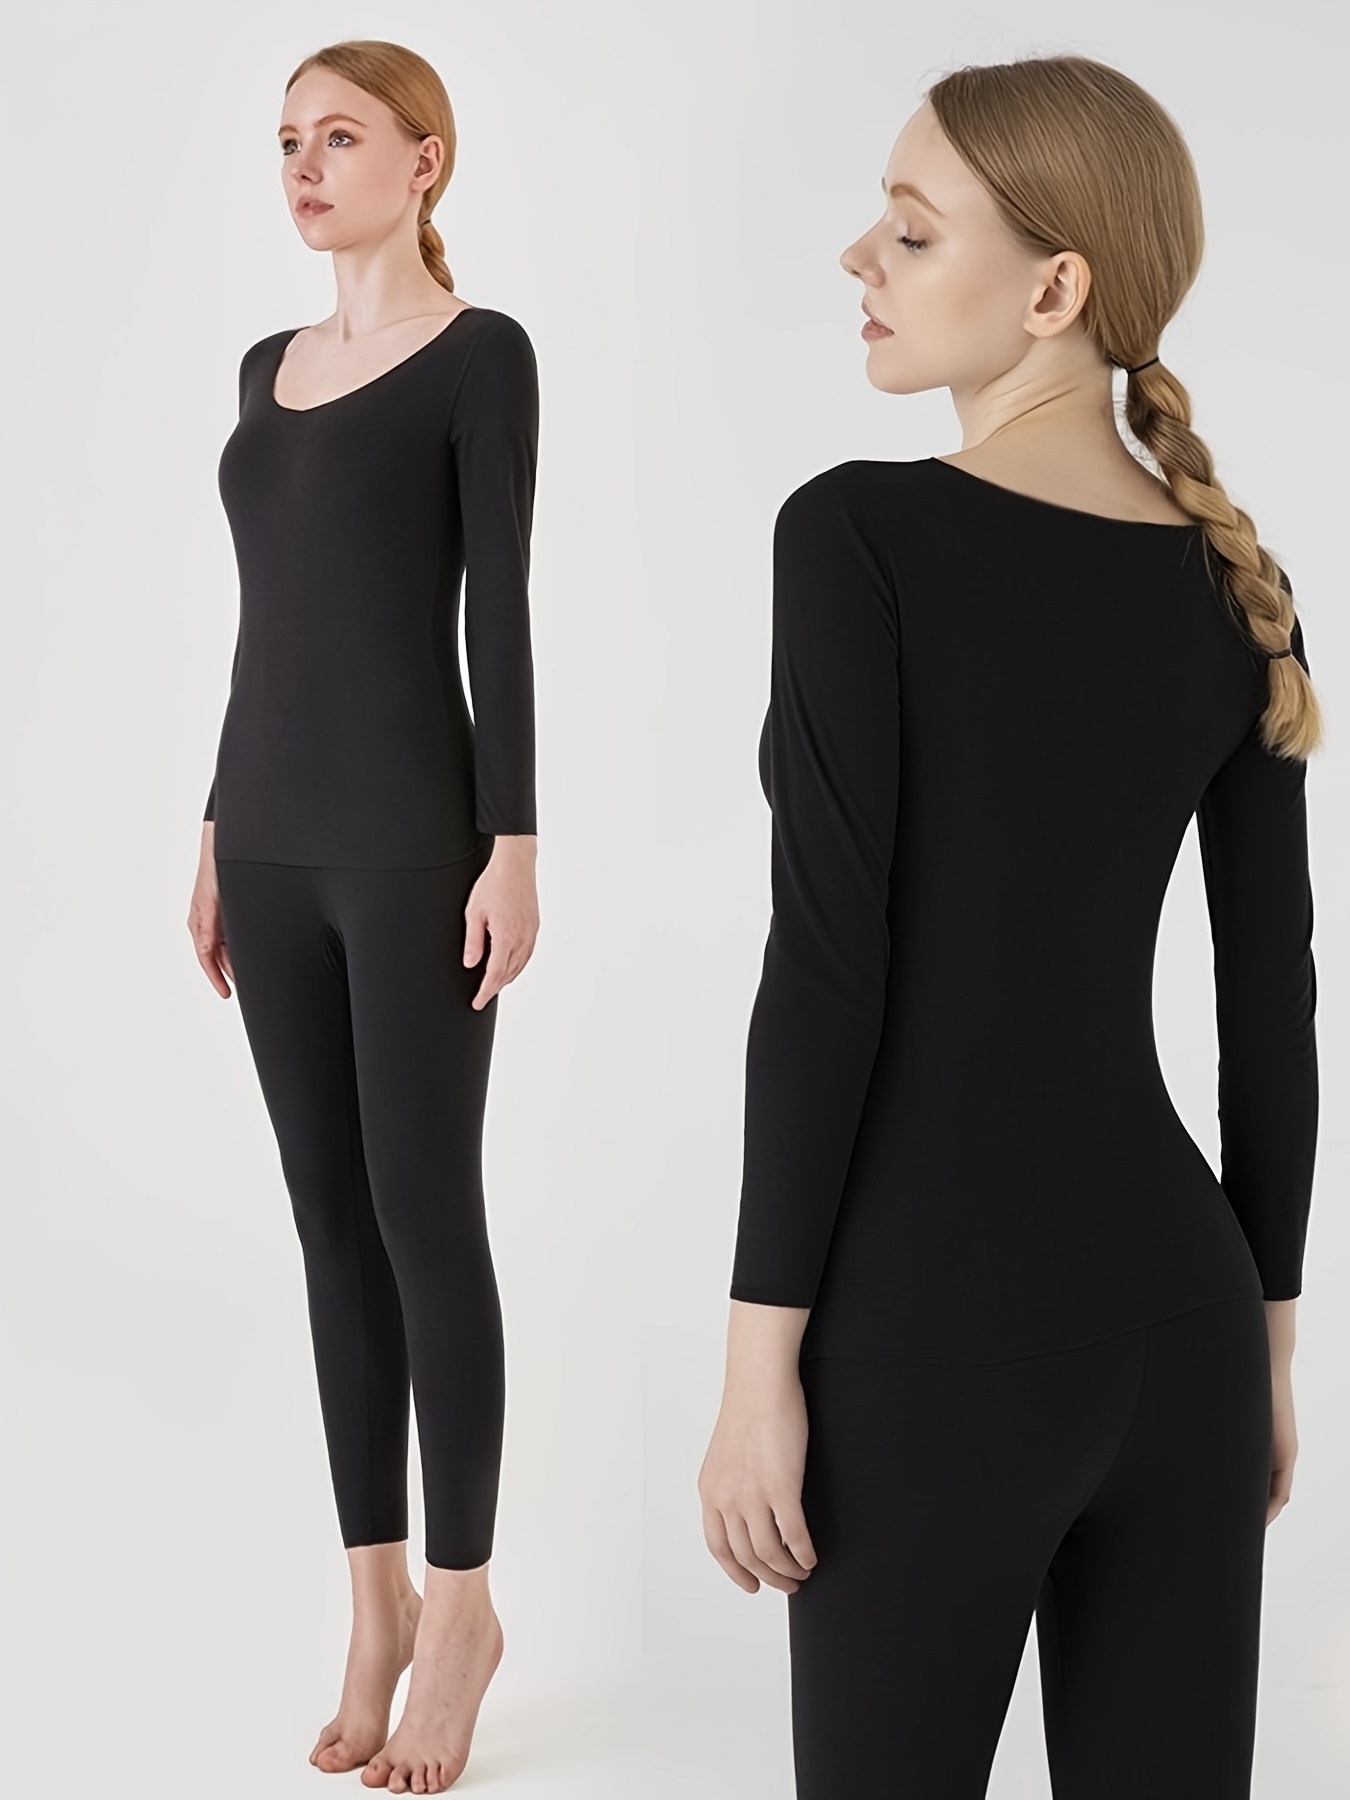 Wholesale winter thermal wear For Intimate Warmth And Comfort 